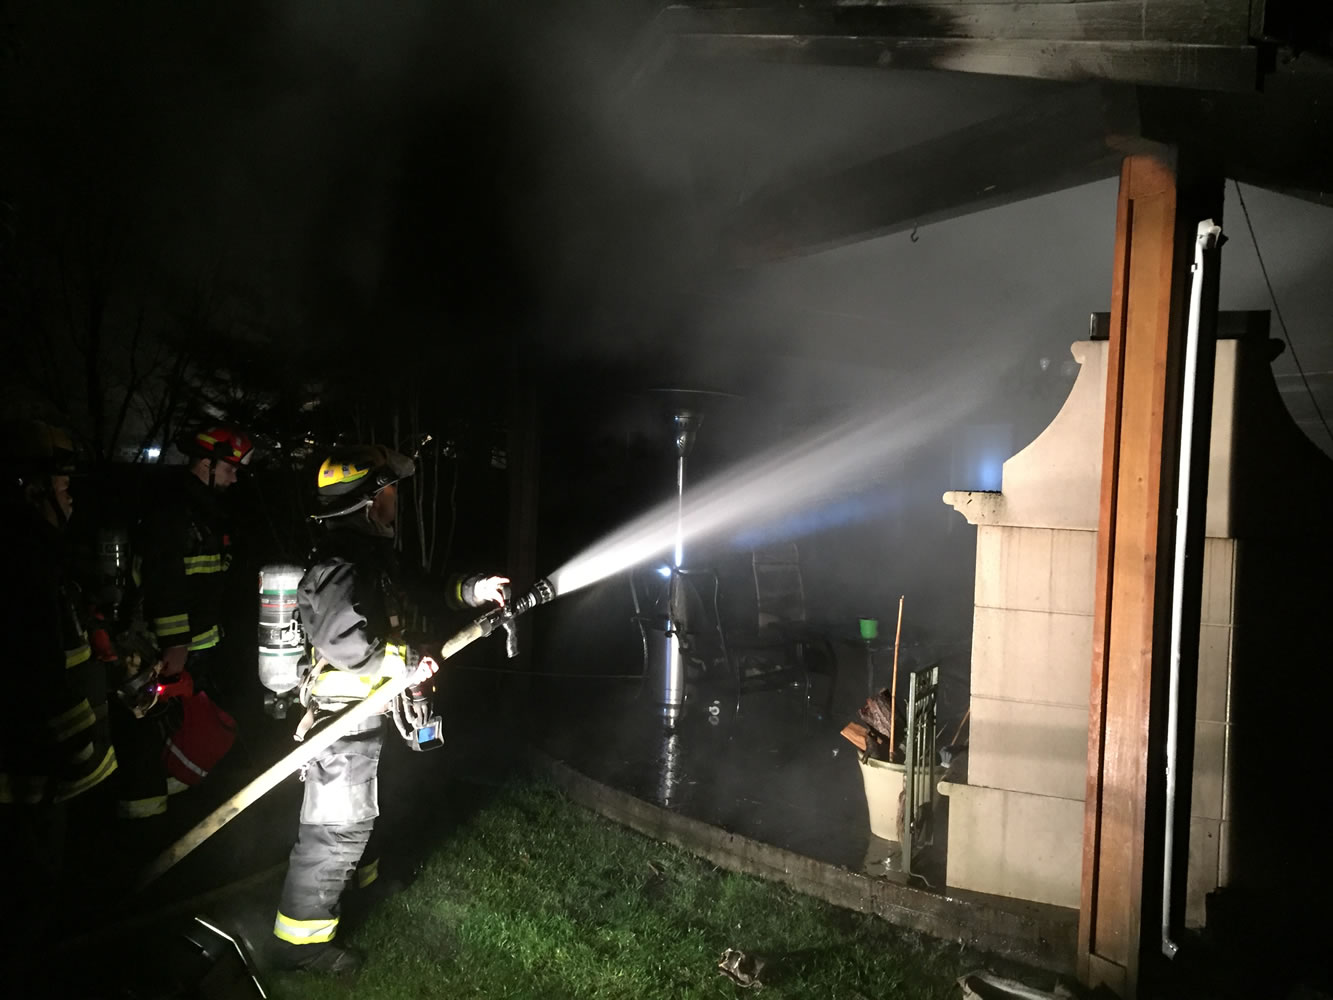 Crews from the Vancouver Fire Department put out a fire that damaged a hot tub and covered patio area, stopping the blaze from spreading to the residence.